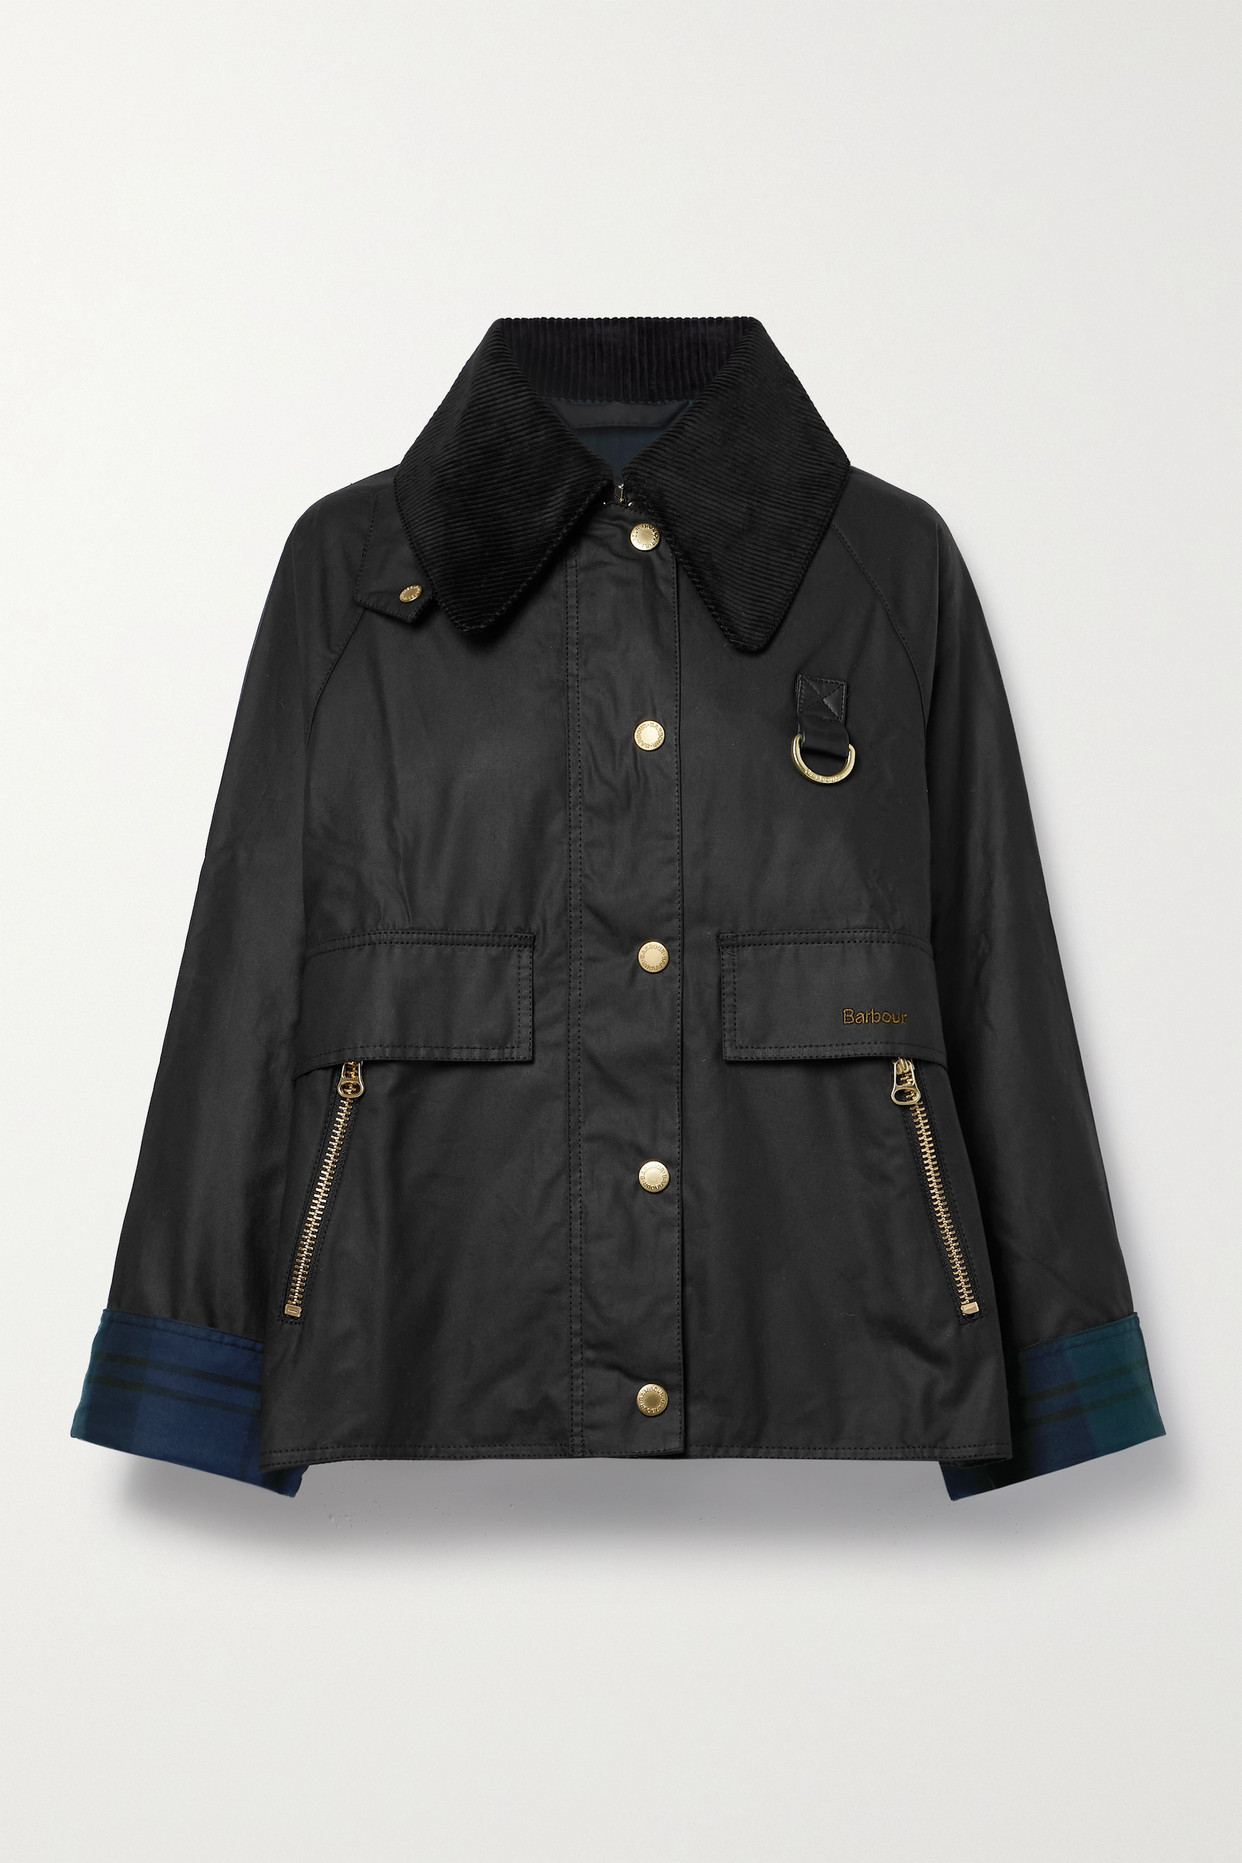 Catton Spey Corduroy-Trimmed Waxed-Cotton Jacket